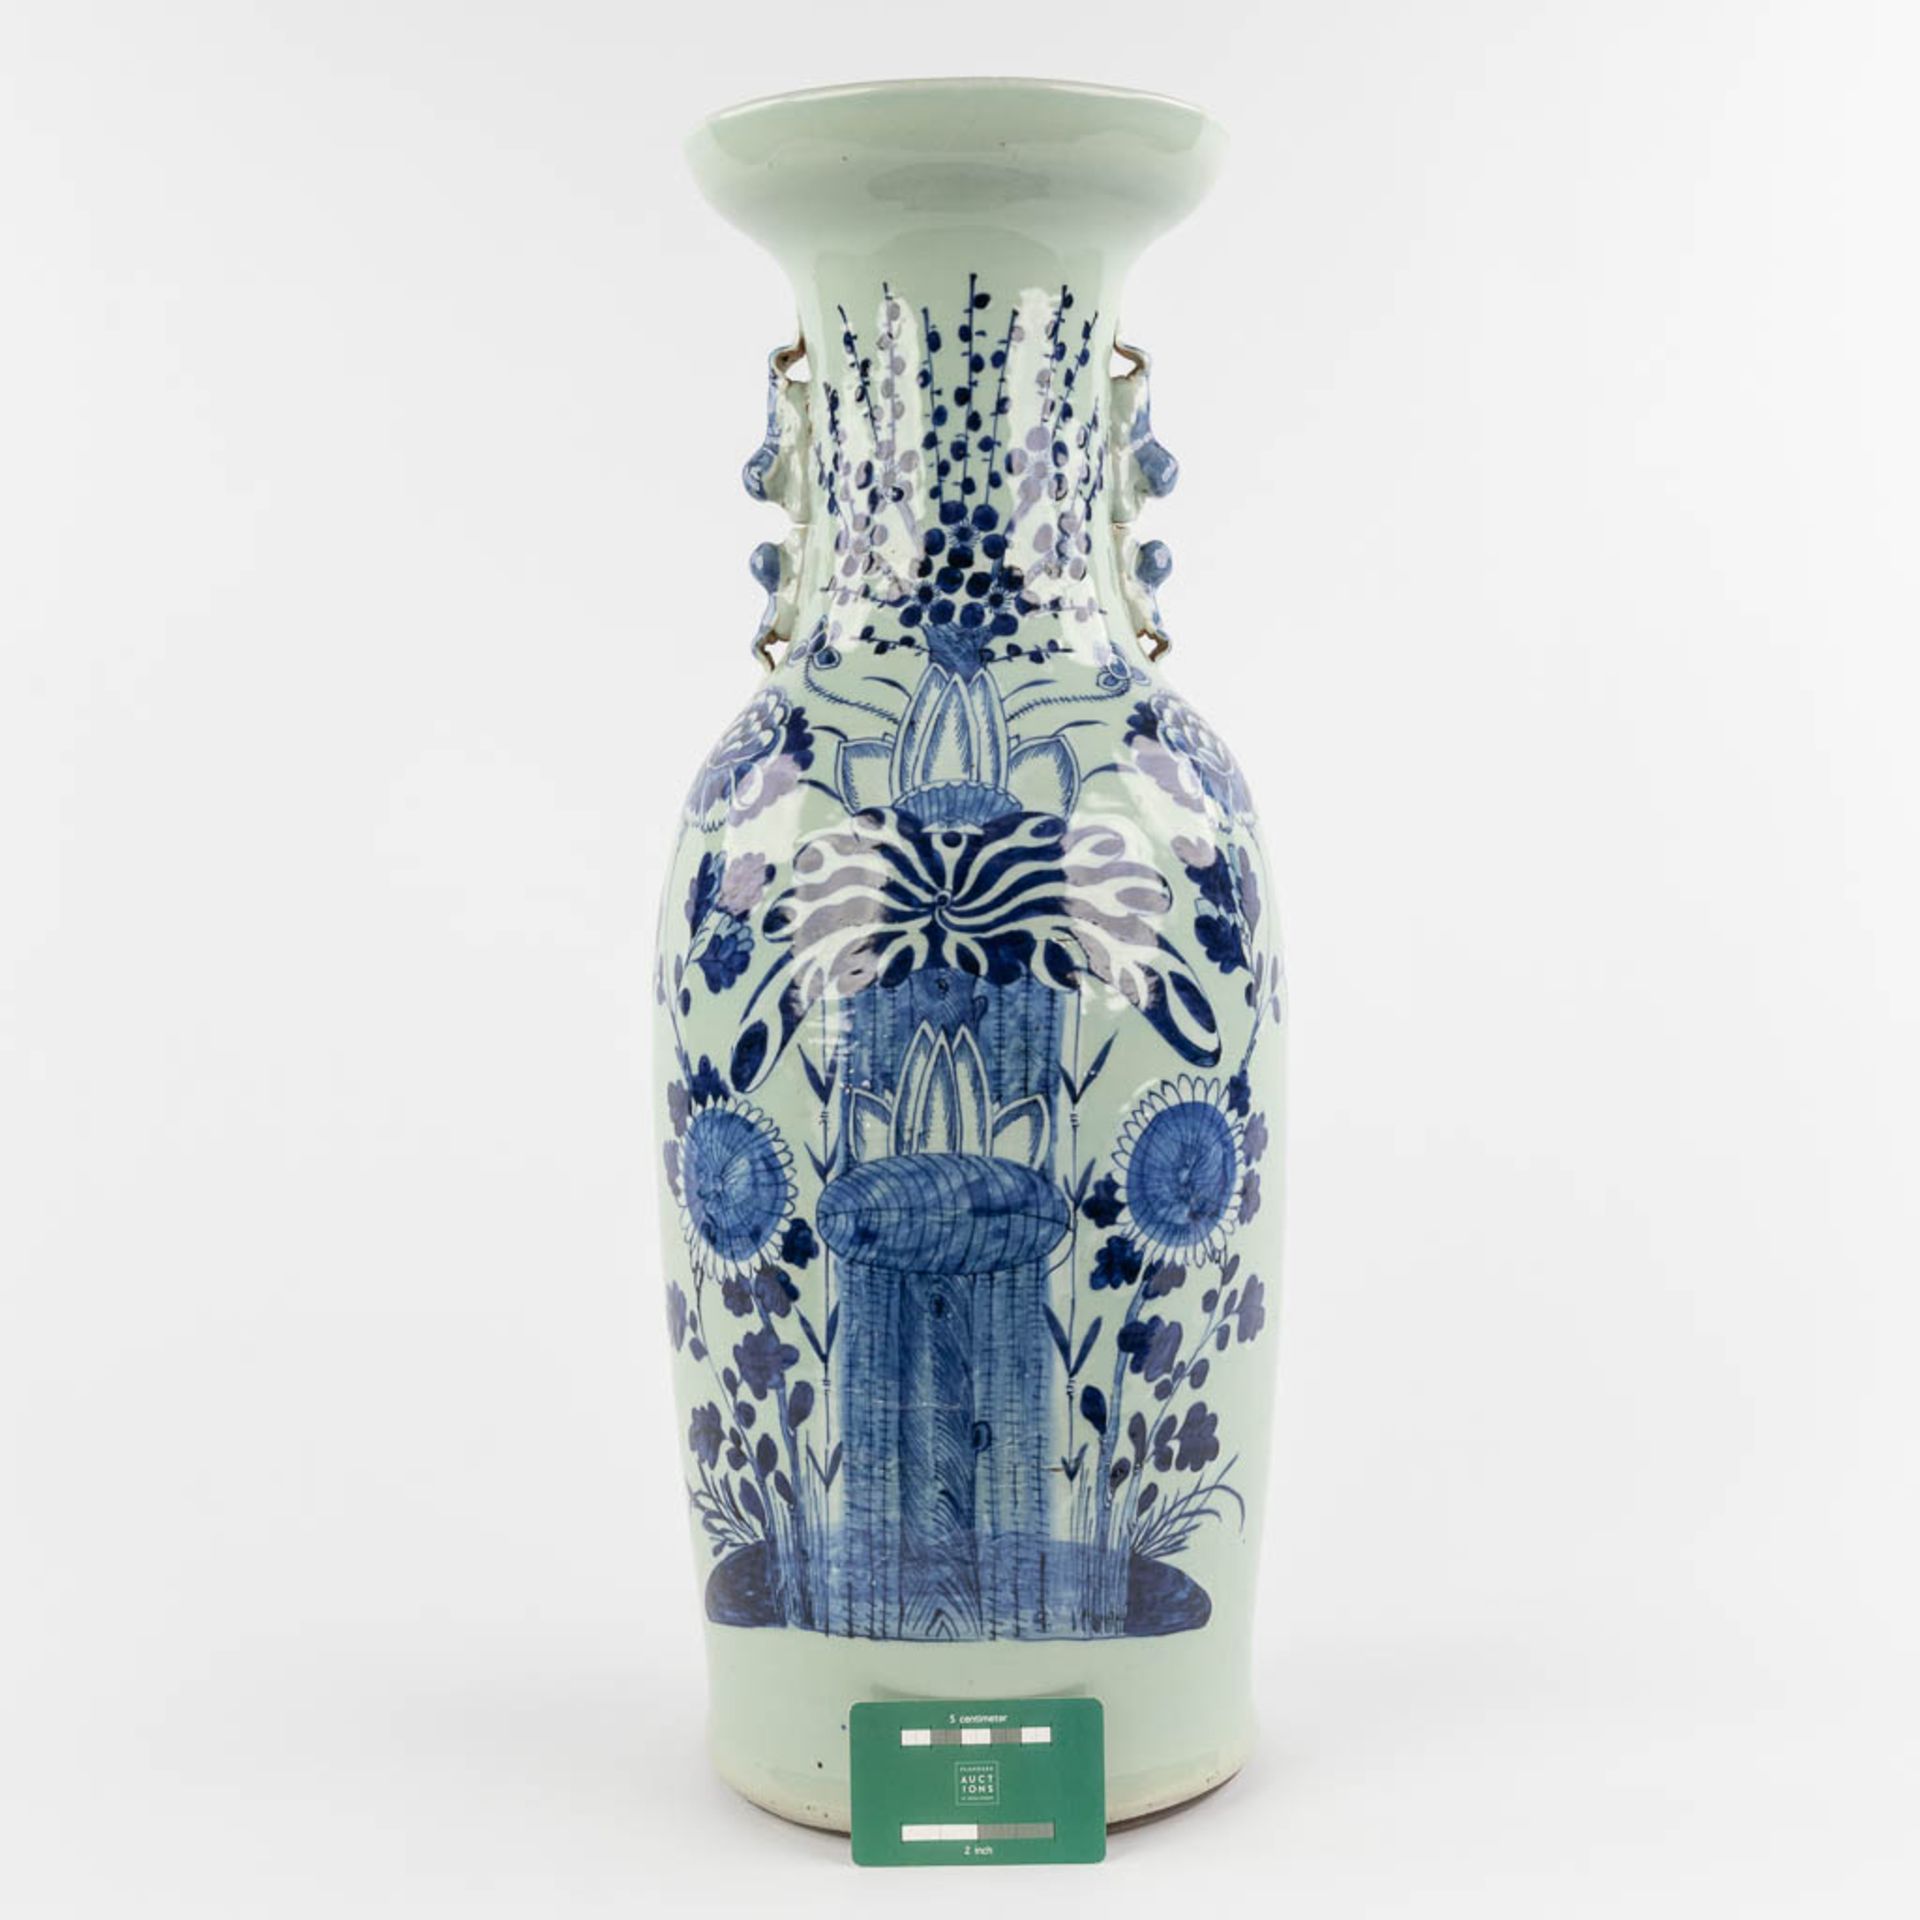 A Chinese Celadon vase with floral decor. 19th/20th C. (H:59 x D:21 cm) - Image 2 of 11